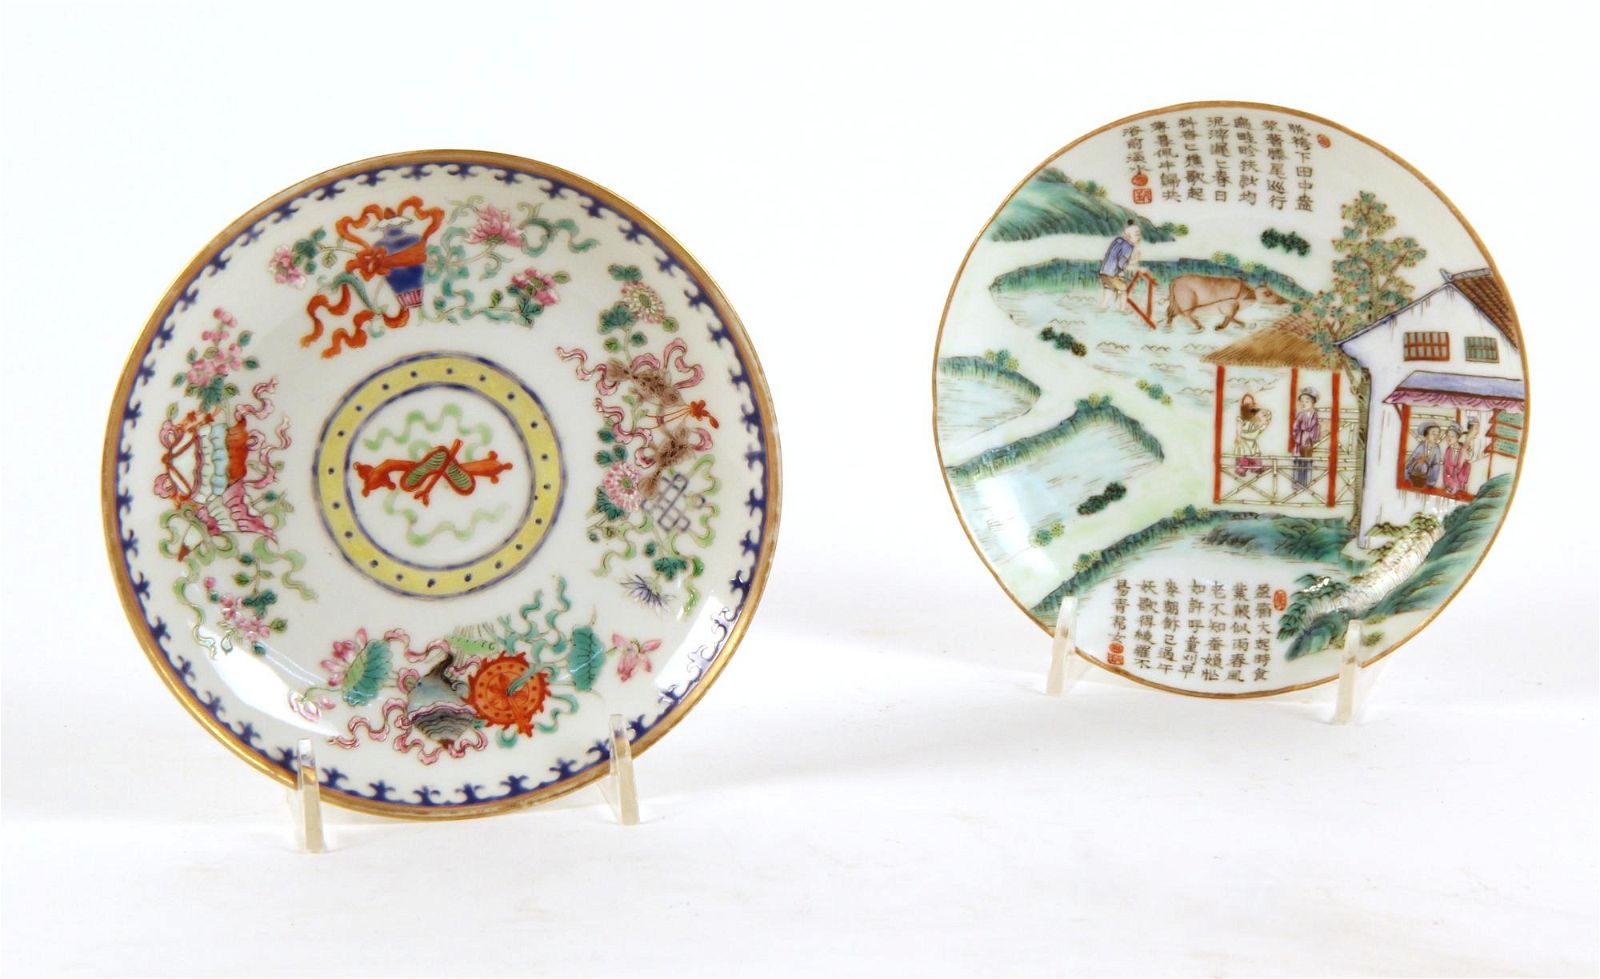 TWO CHINESE PORCELAIN PLATESTwo 2fb26b9